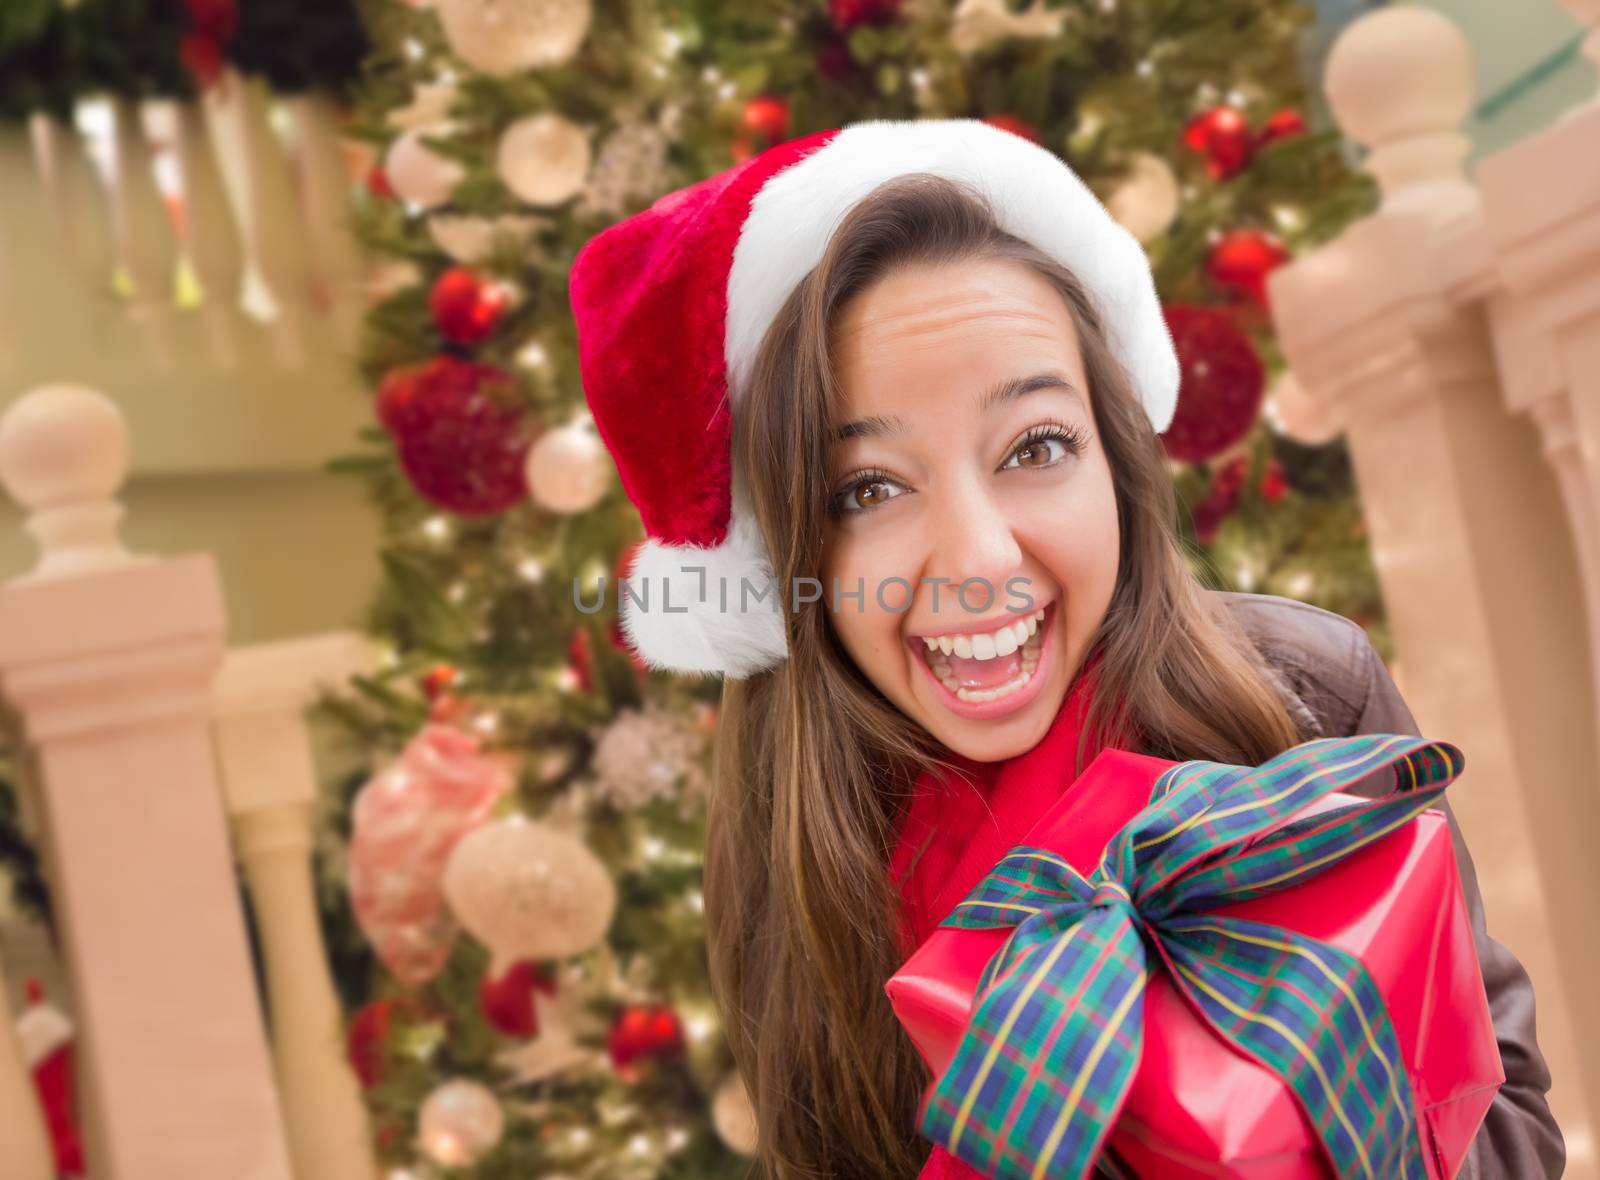 Girl Wearing A Christmas Santa Hat with Bow Wrapped Gift In Front of Decorated Tree by Feverpitched